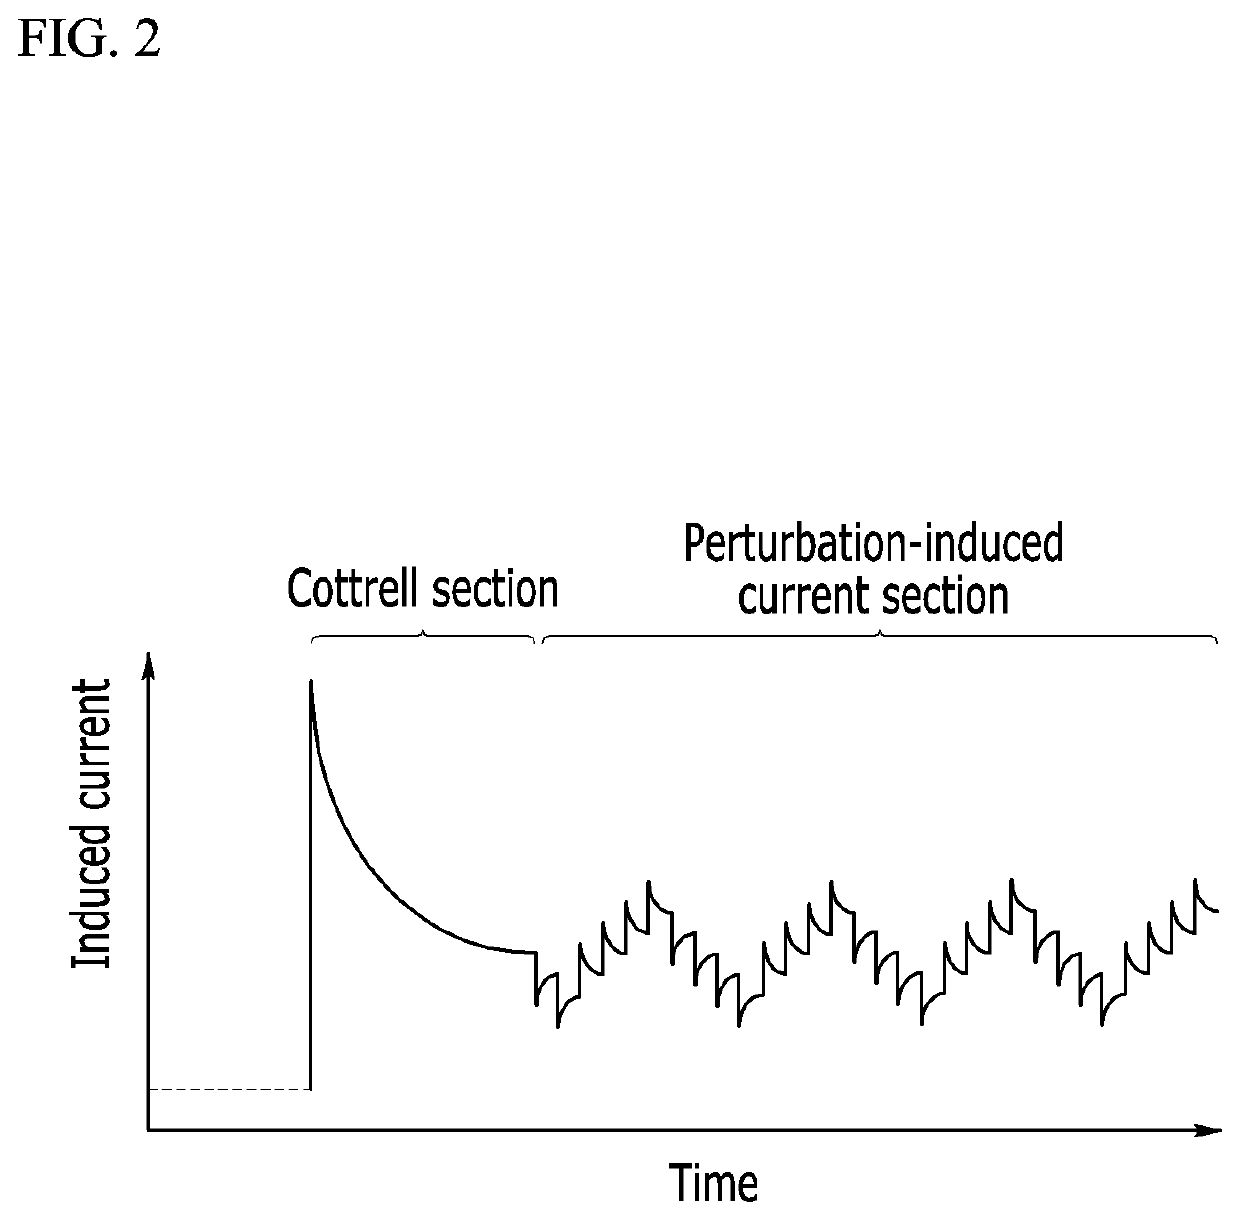 Apparatus and method for measuring concentration of an analyte in whole blood samples